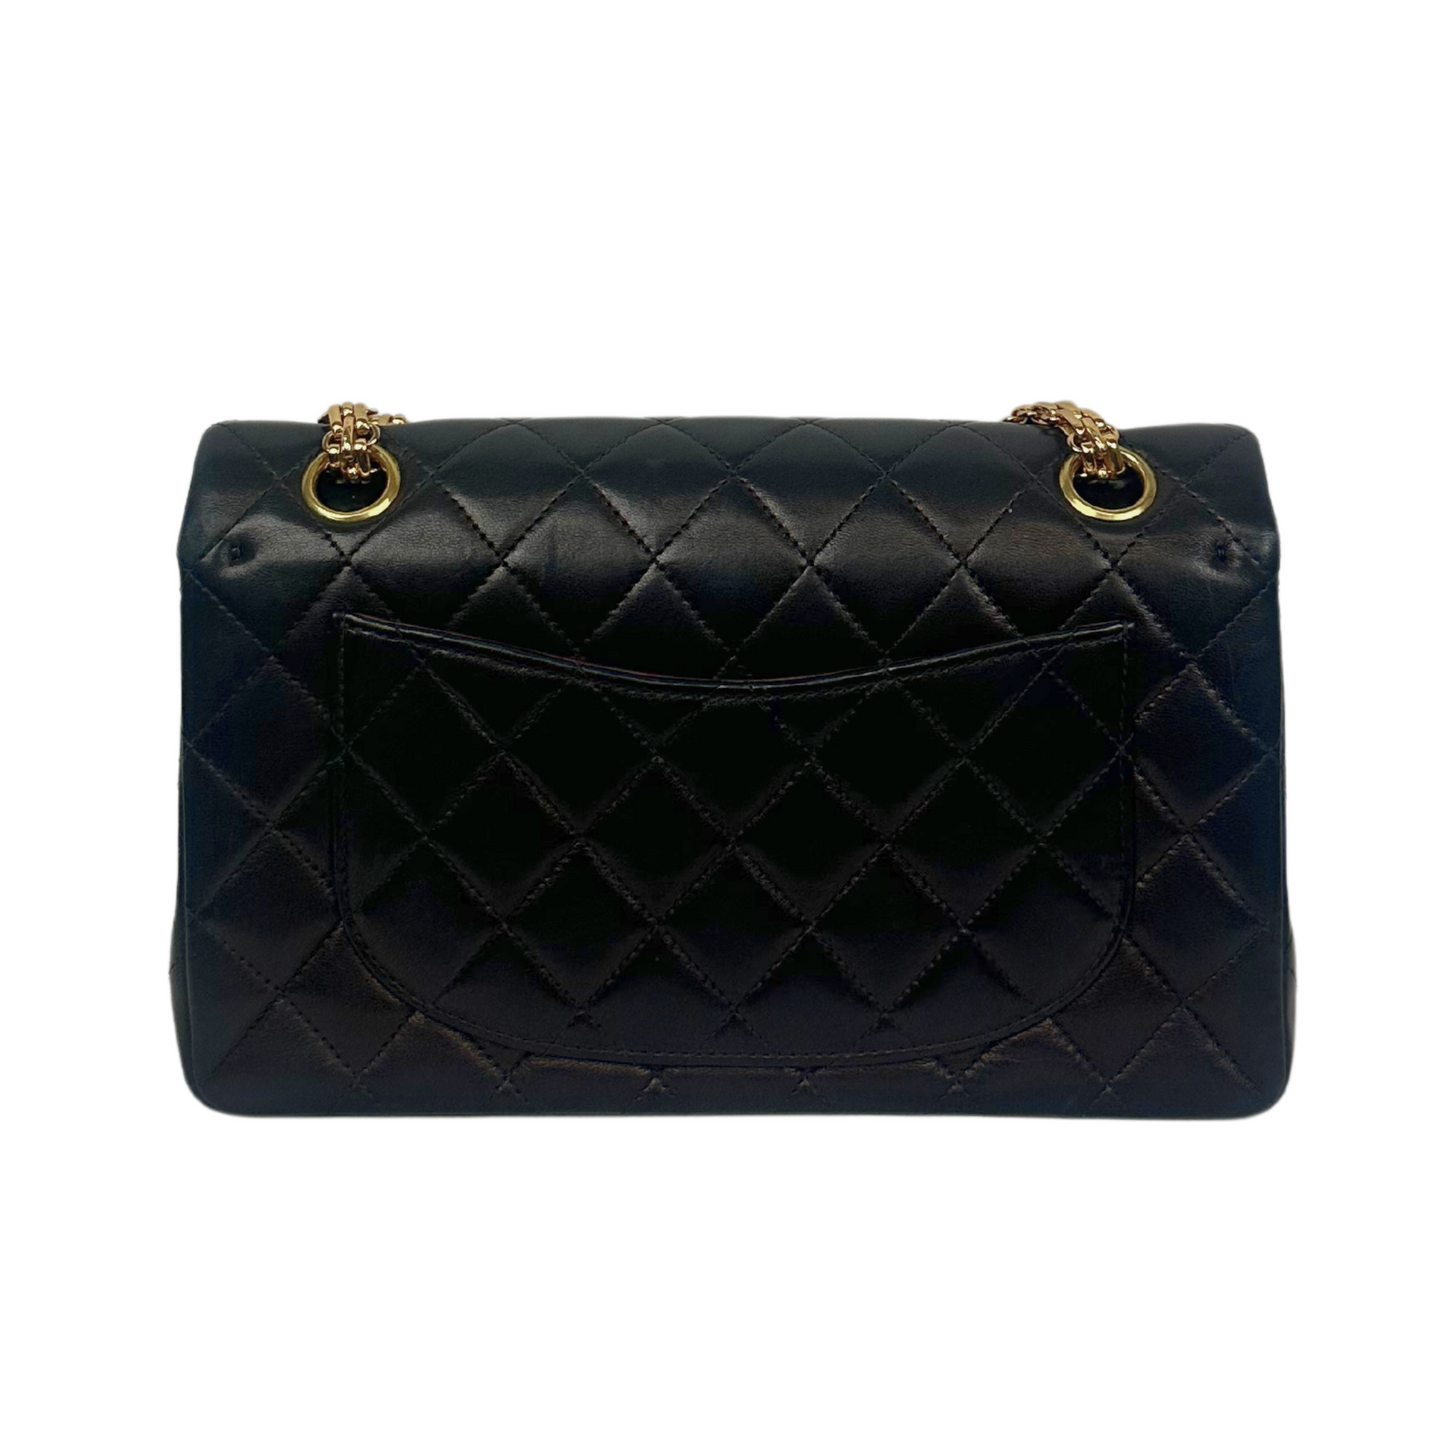 CHANEL 2.55 Reissue Classic Quilted